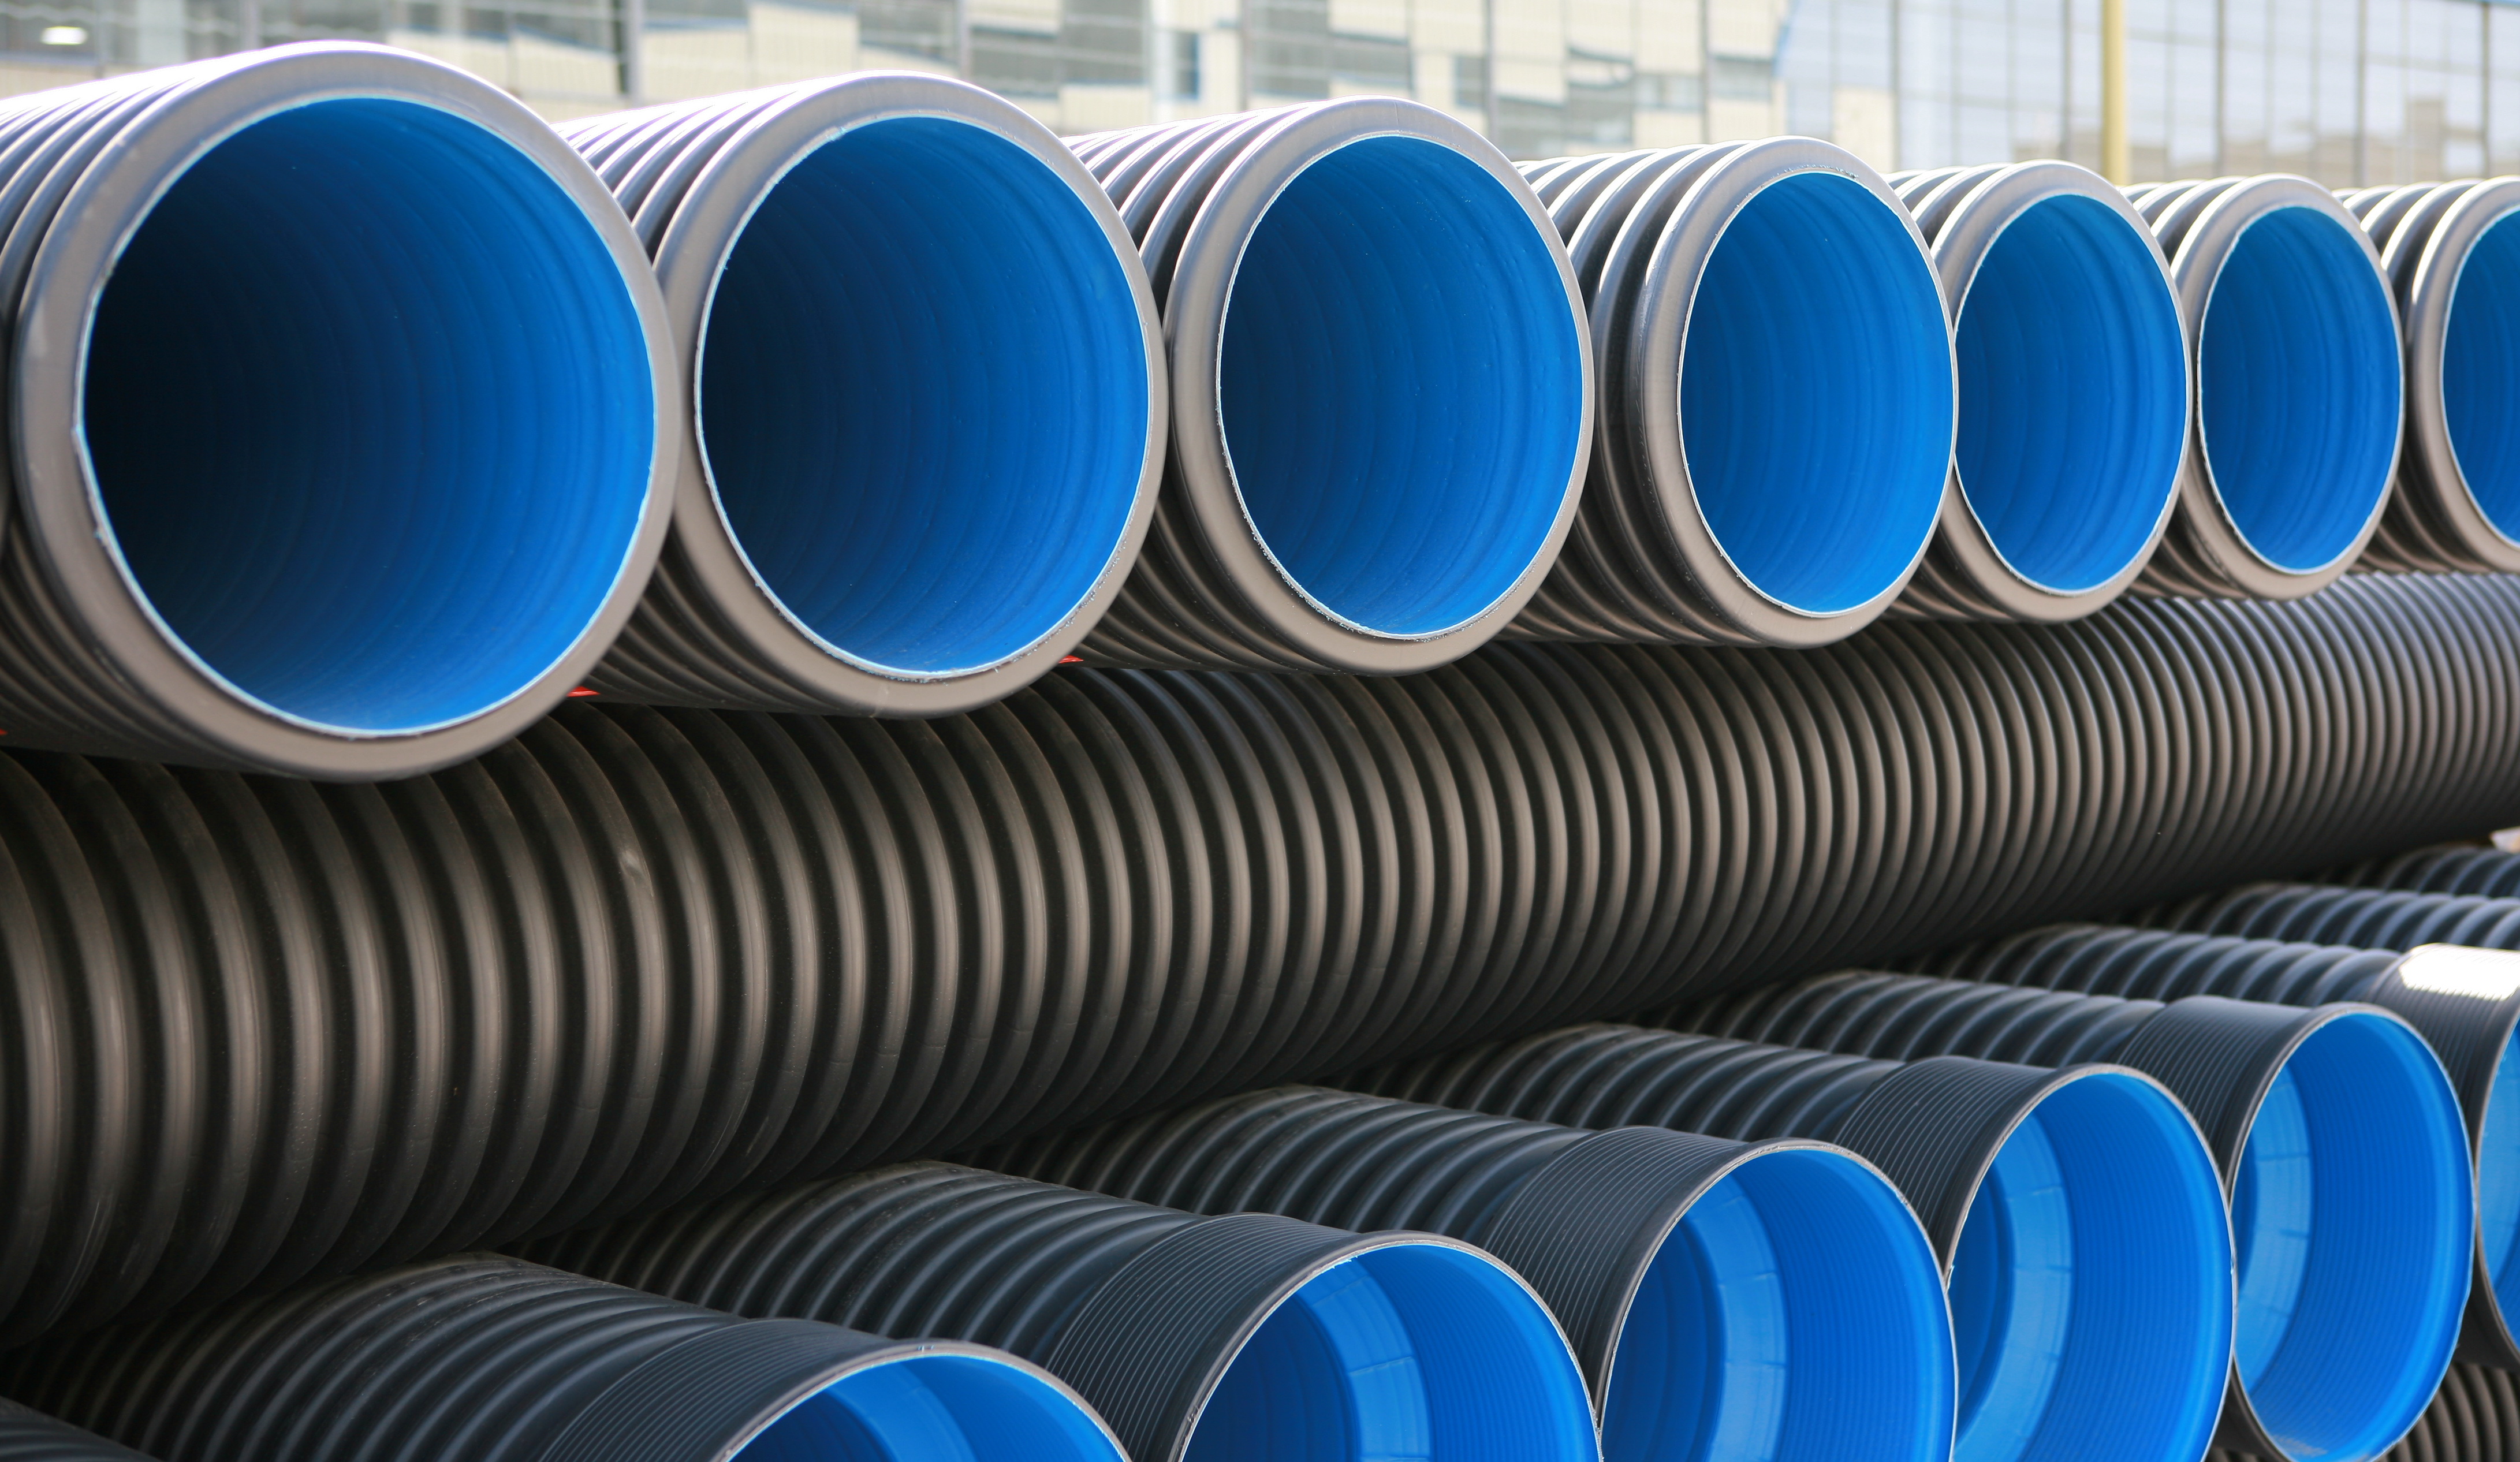 PE double wall corrugated pipe